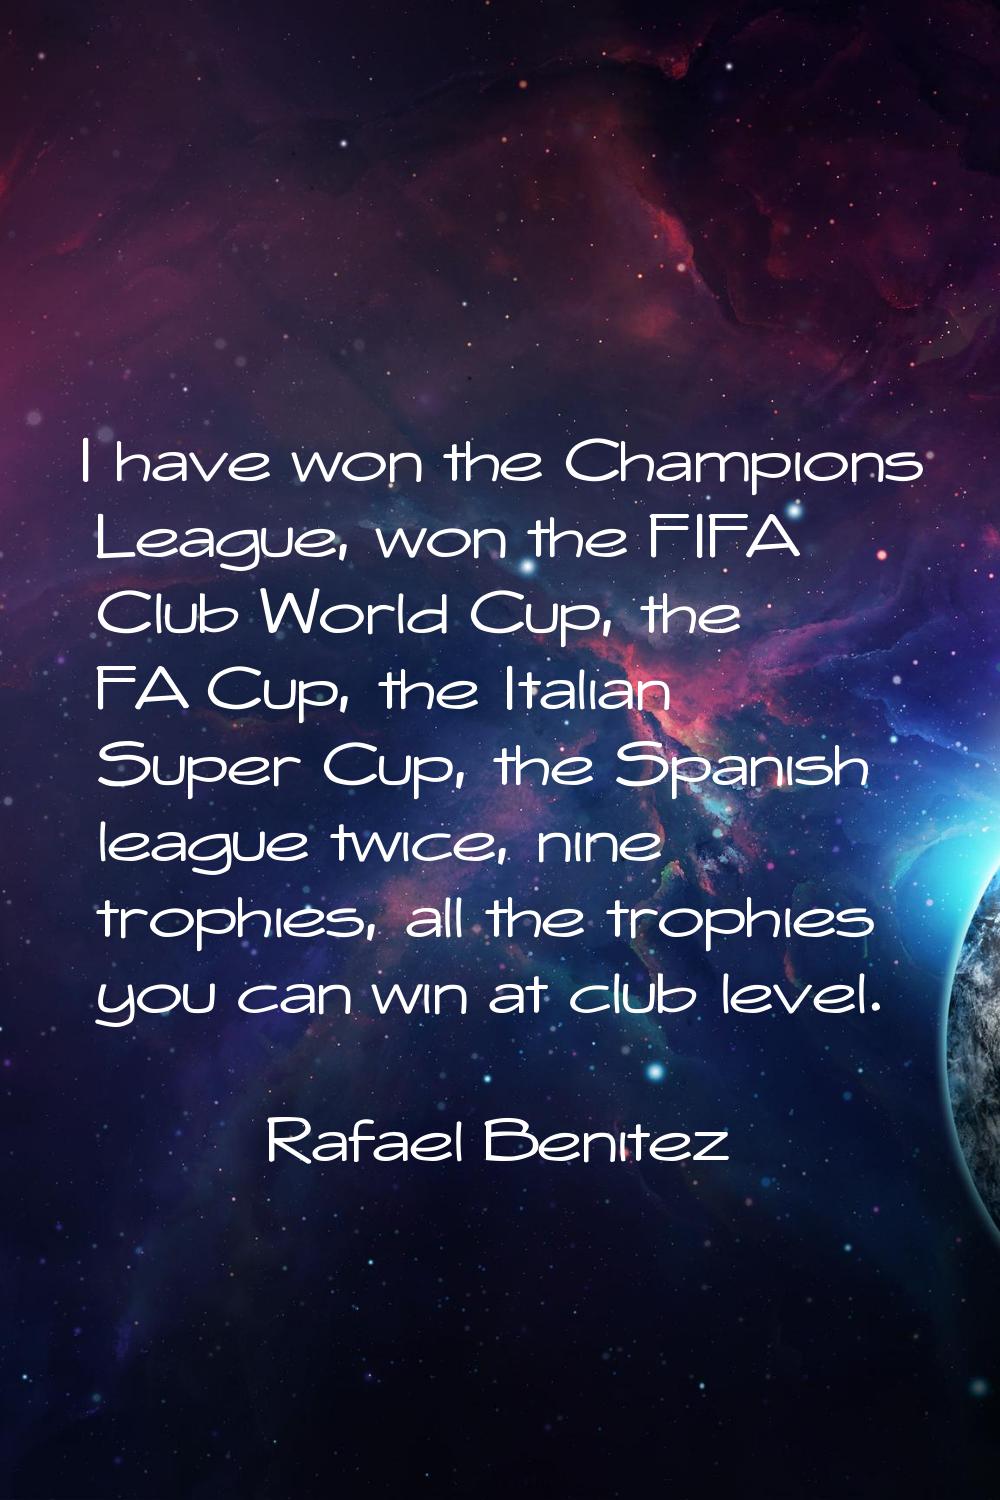 I have won the Champions League, won the FIFA Club World Cup, the FA Cup, the Italian Super Cup, th